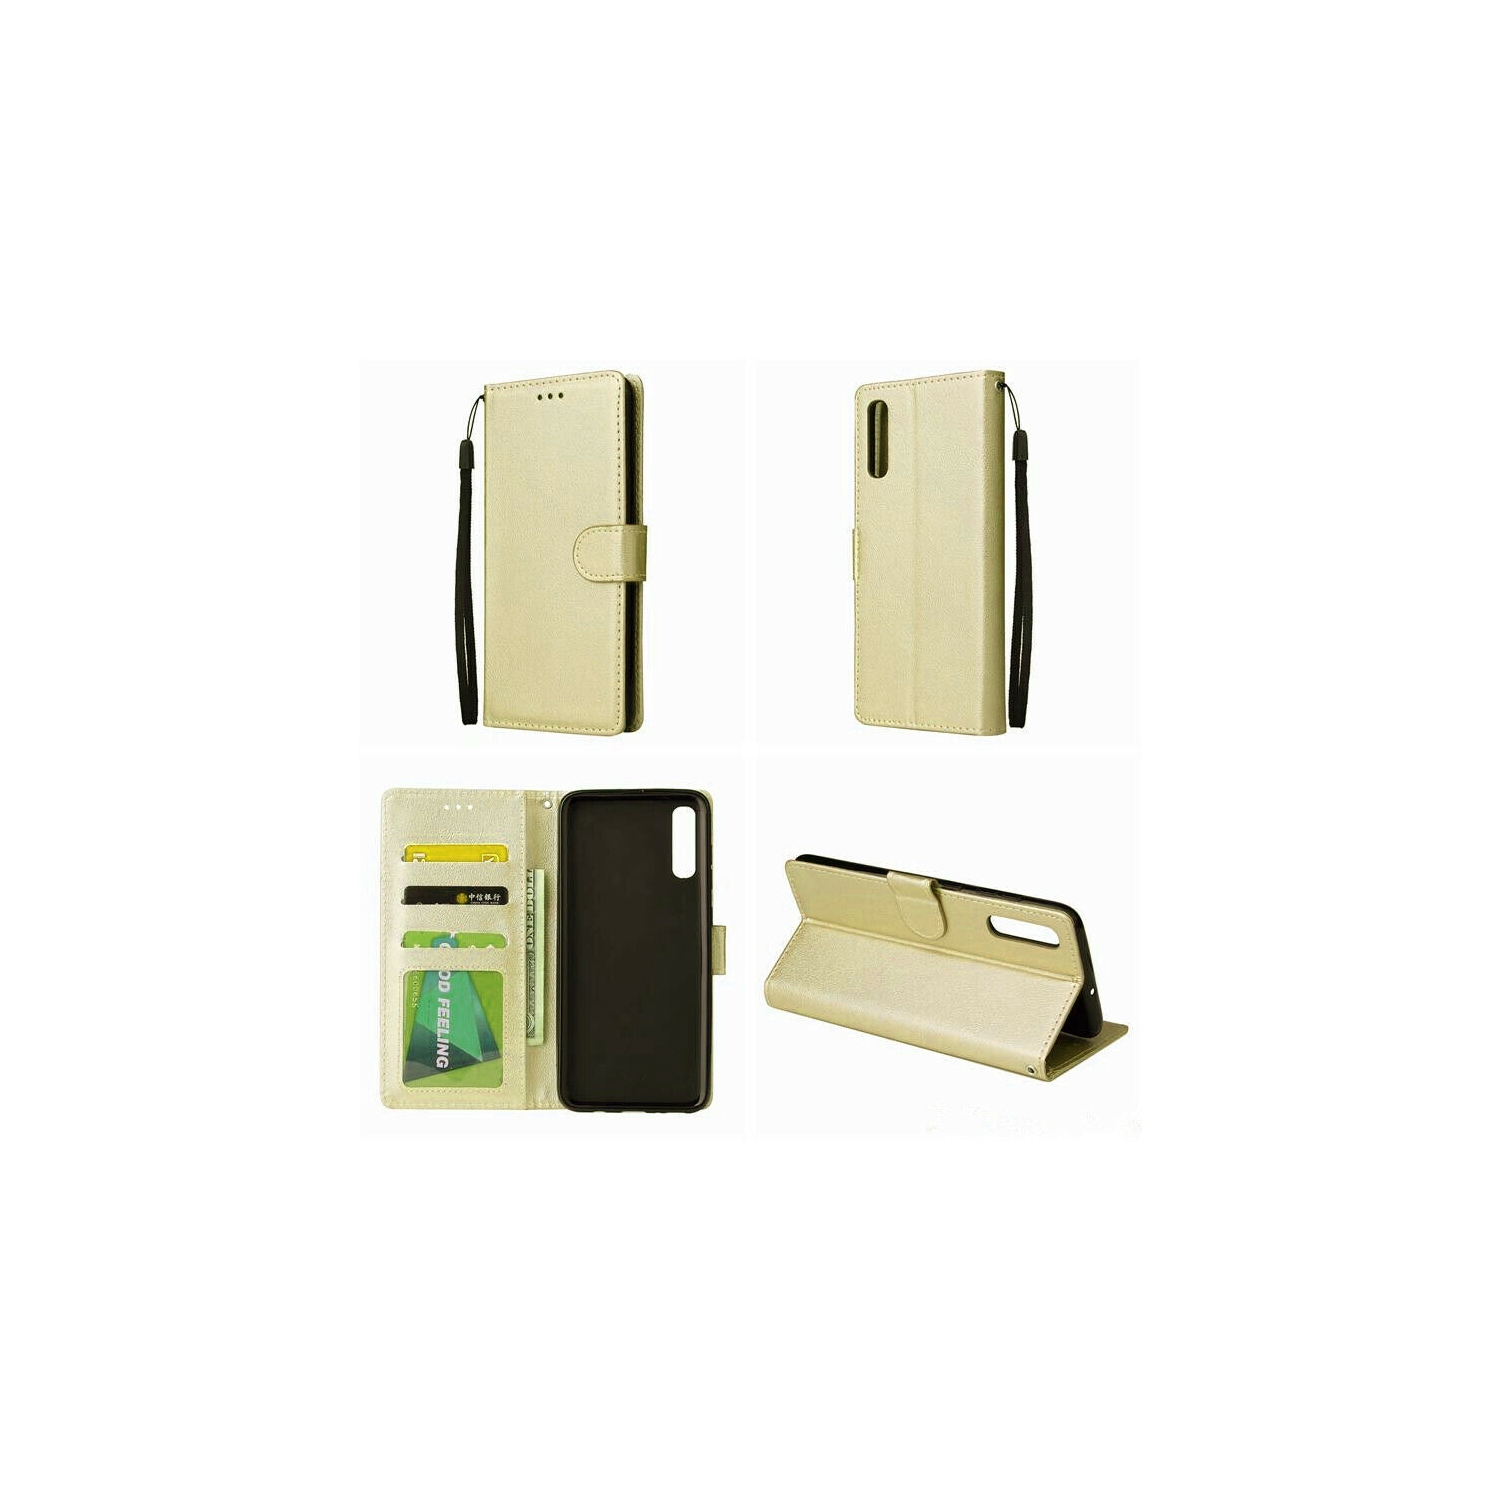 【CSmart】 Magnetic Card Slot Leather Folio Wallet Flip Case Cover for Samsung A50 / A50s / A30s, Gold